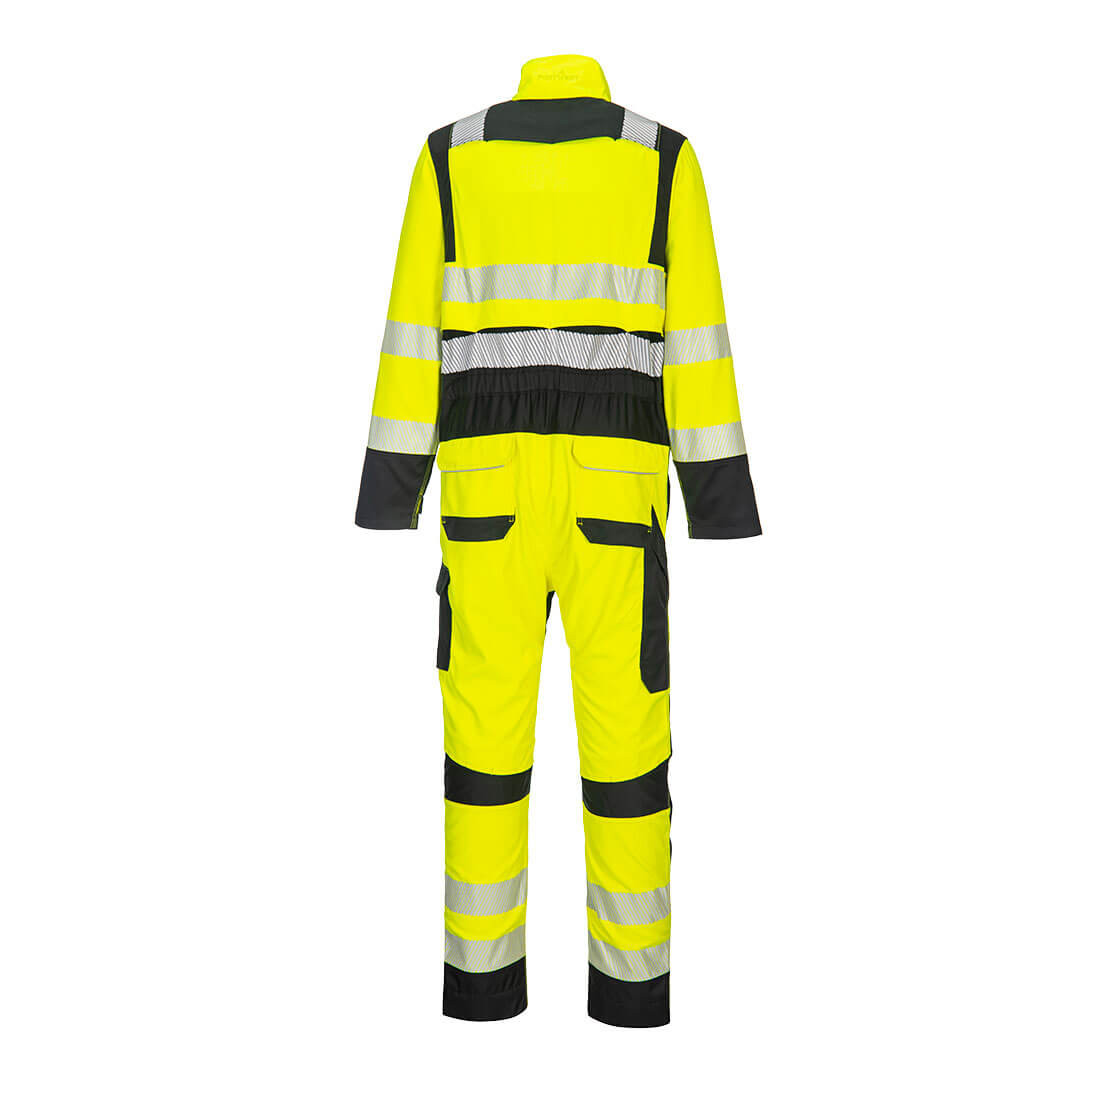 PW3 FR Hi-Vis Coverall - Safetywear